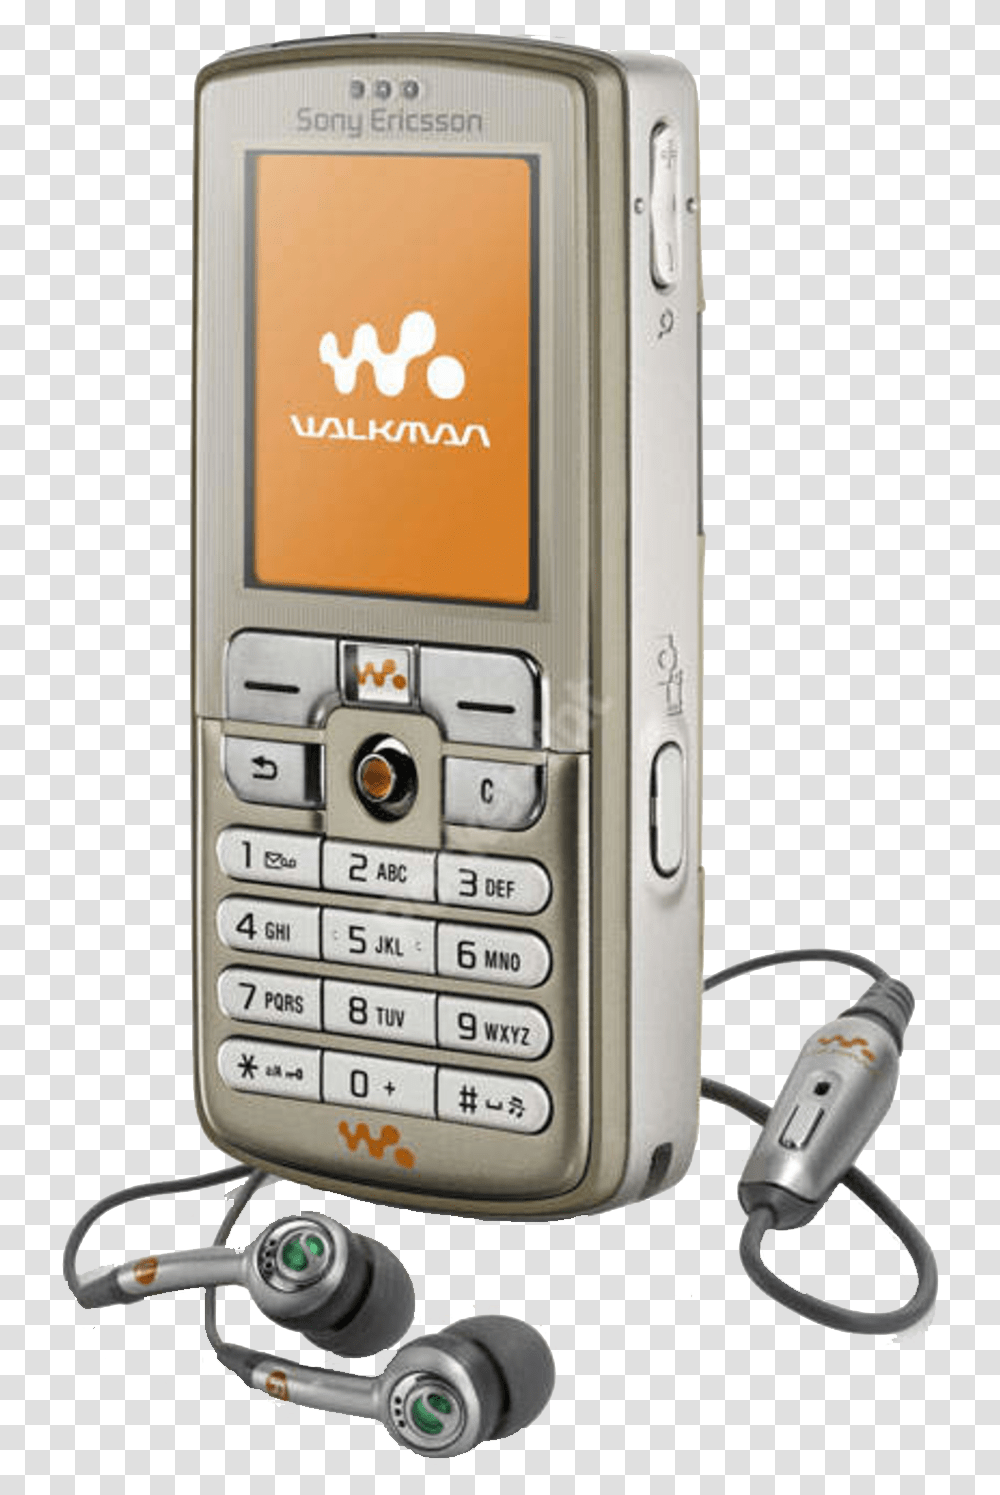 Sony Ericsson Walkman, Mobile Phone, Electronics, Cell Phone, Gas Pump Transparent Png